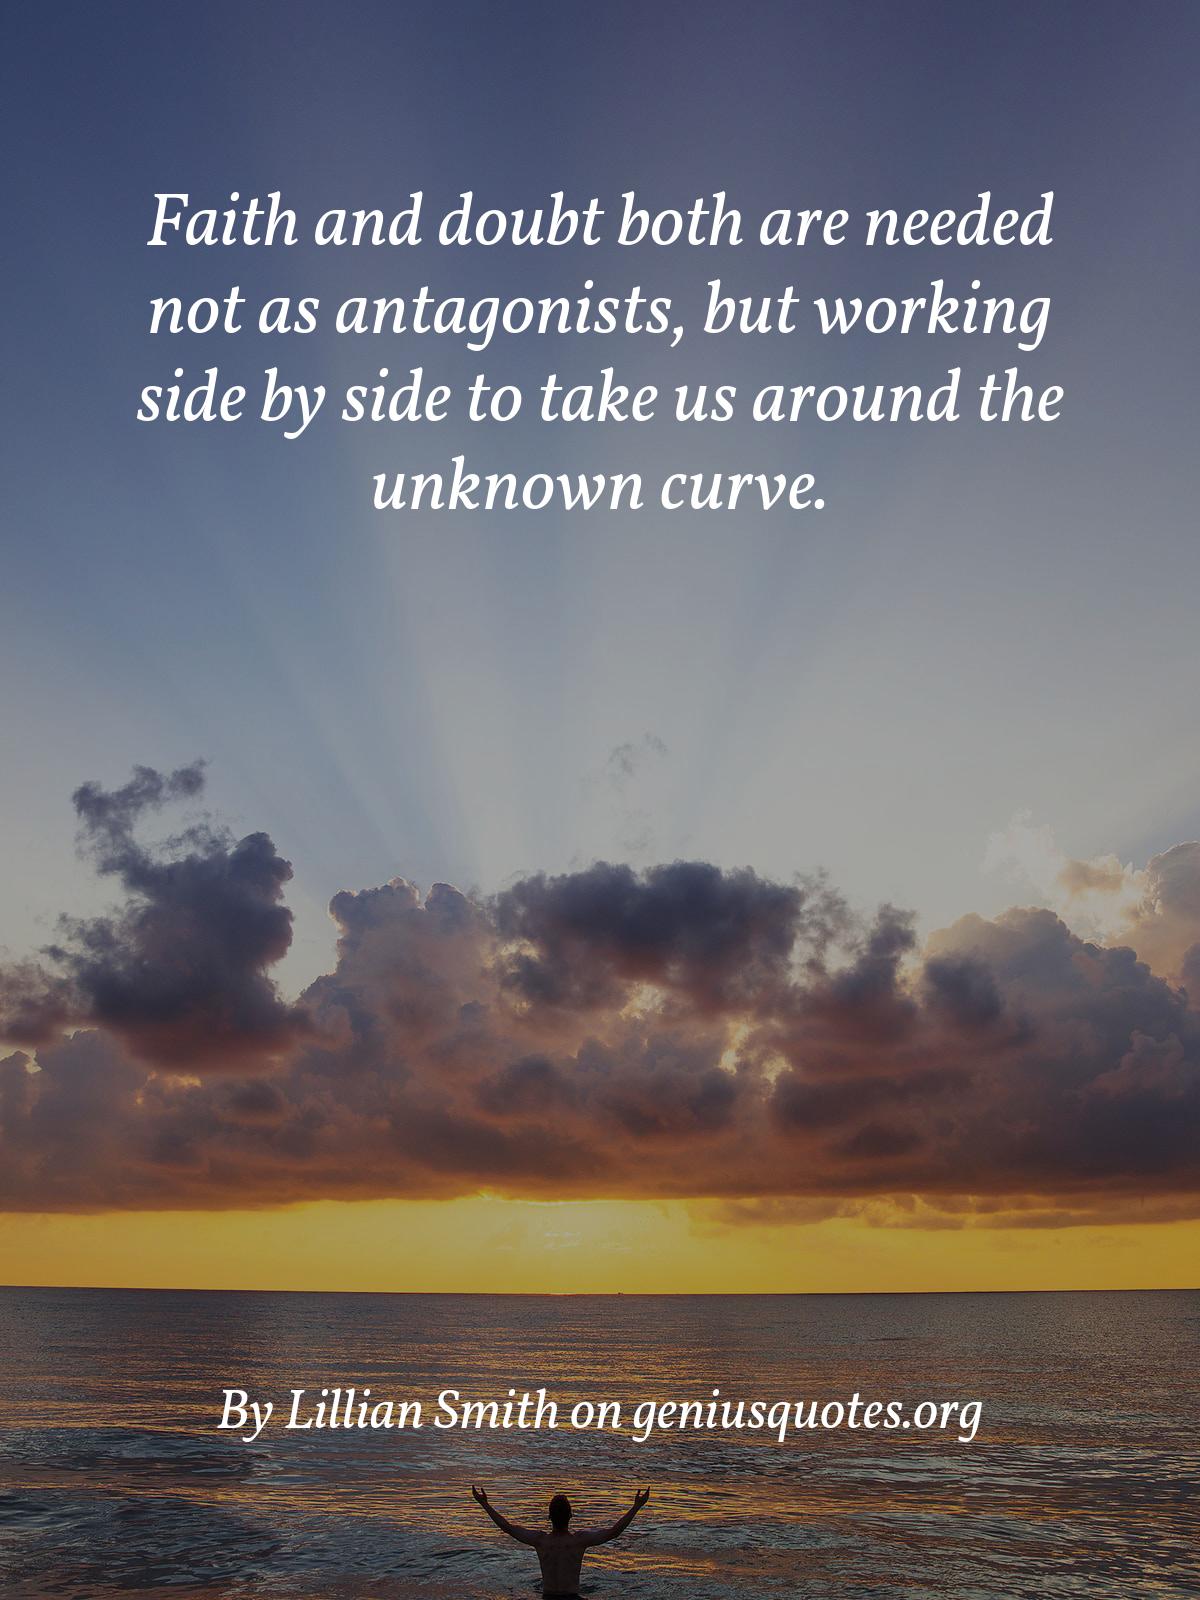 faith and doubt both are needed not as antagonists, but working side by side to take us around the unknown curve